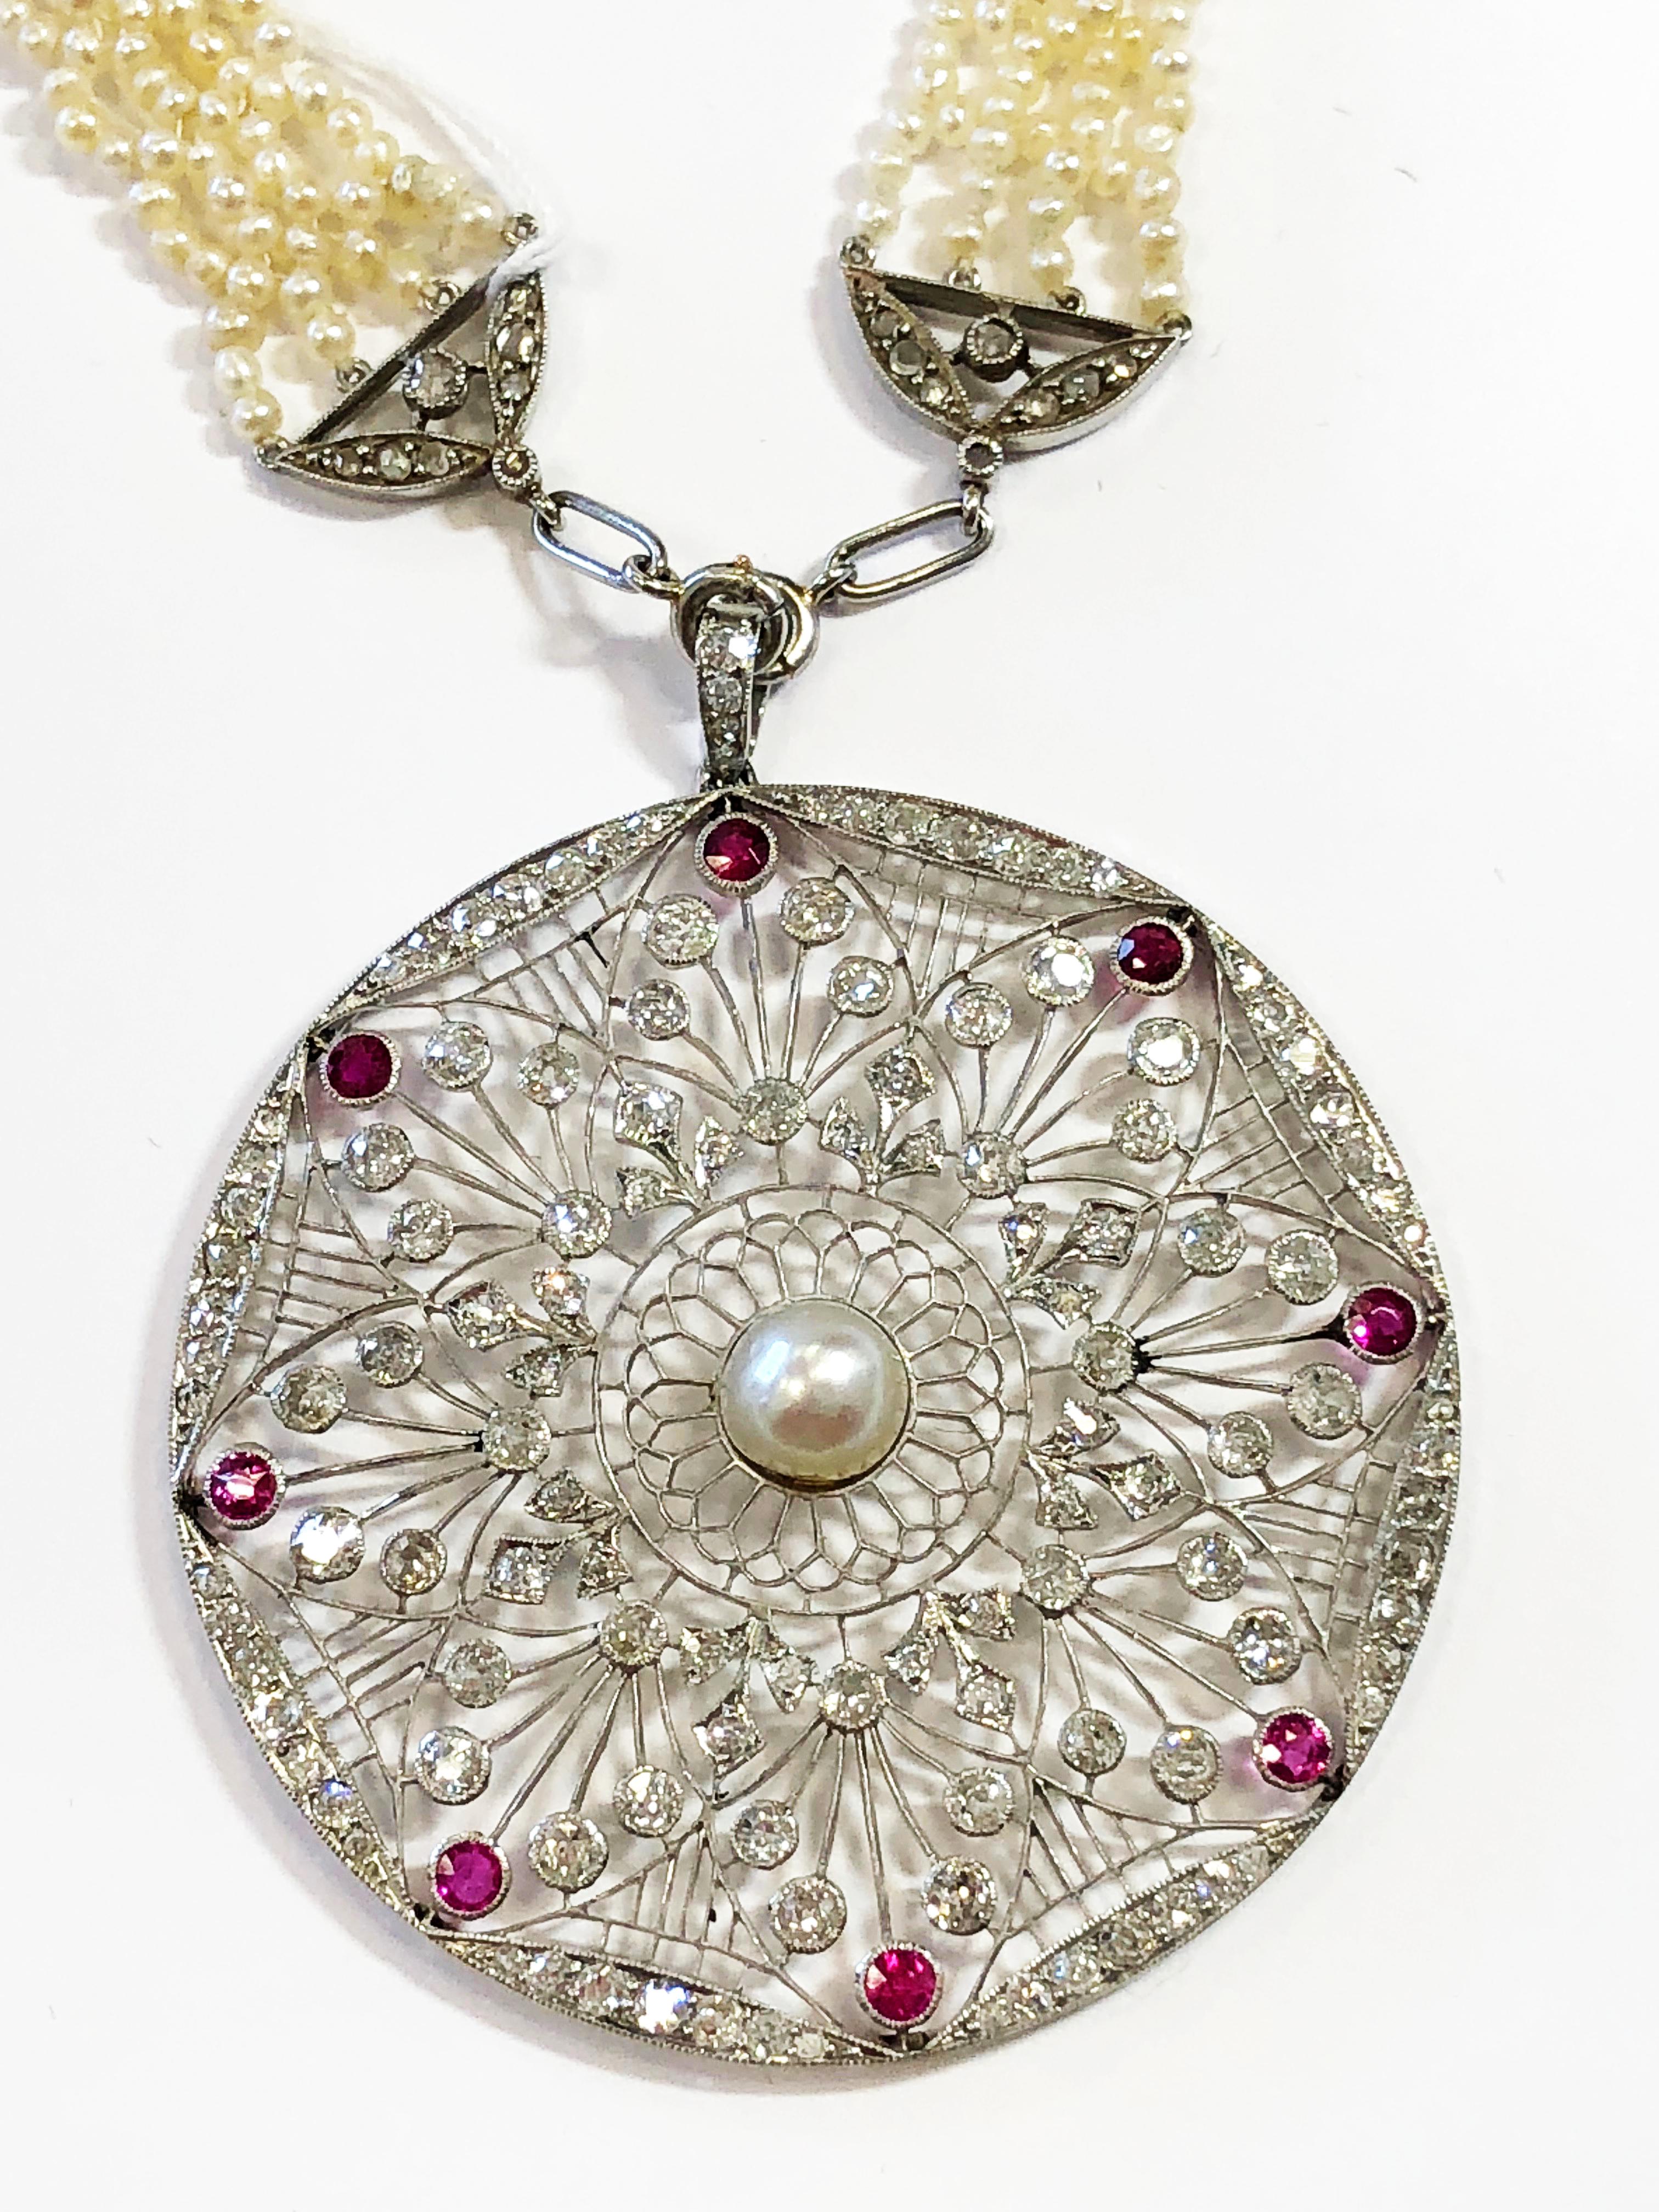 Breathtaking Edwardian estate natural white pearl and white diamond necklace.  Gorgeous pendant/medallion design with delicate handwork.  This piece is unique because it has a mix of natural pearls, with metal, diamonds, and color stones.  Ideal for